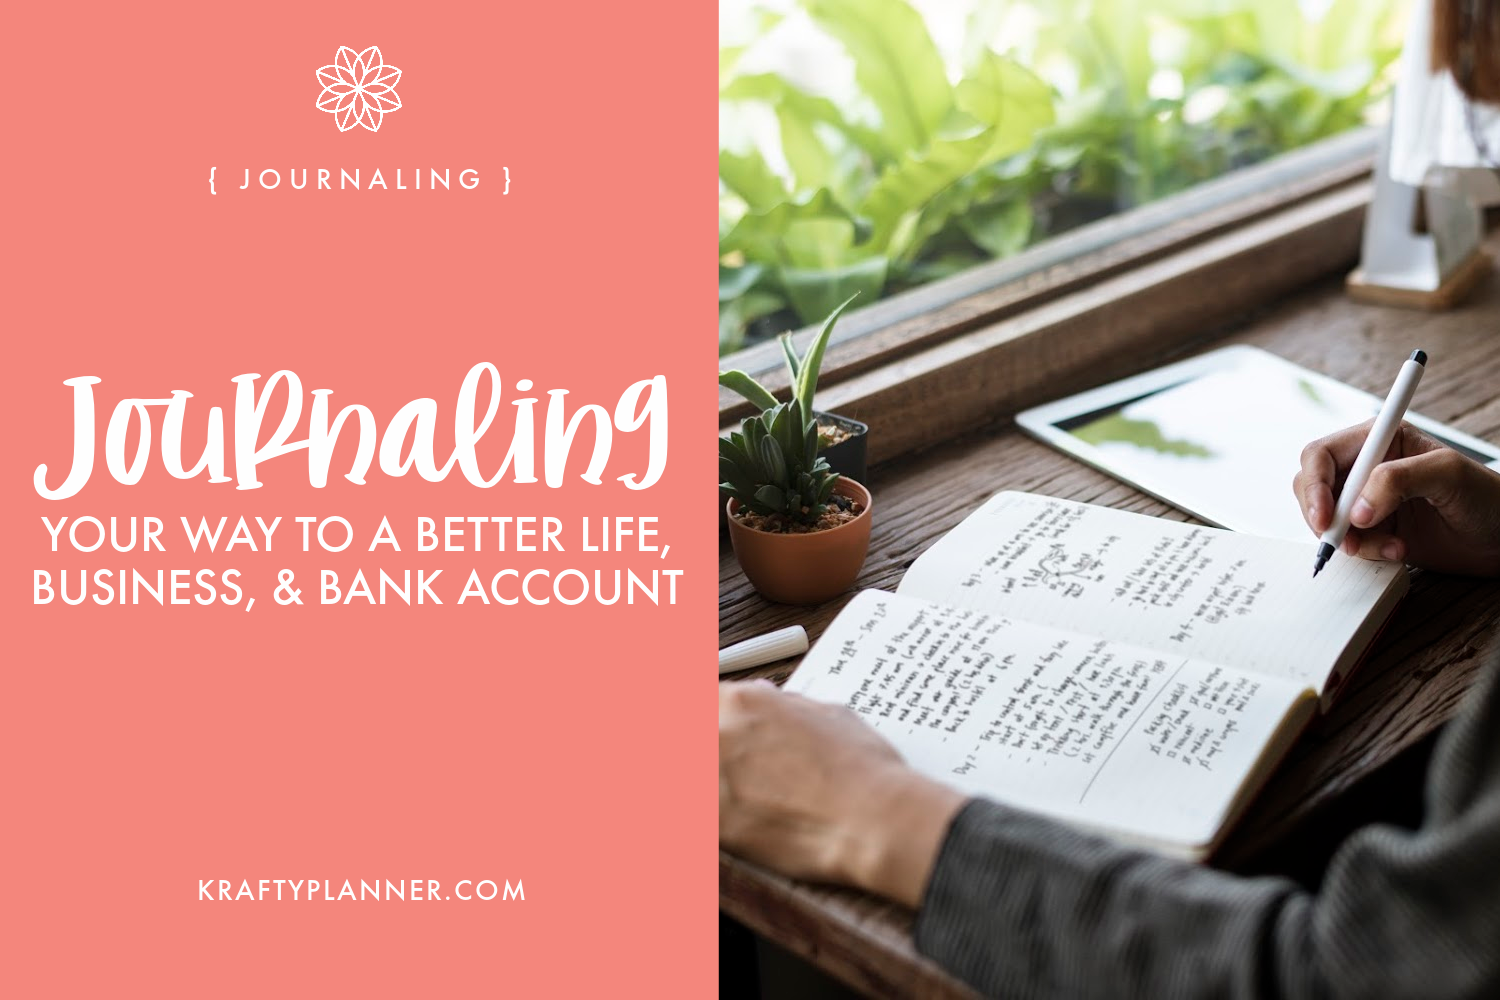 Journaling Your Way to a Better Life, Business & Bank Account